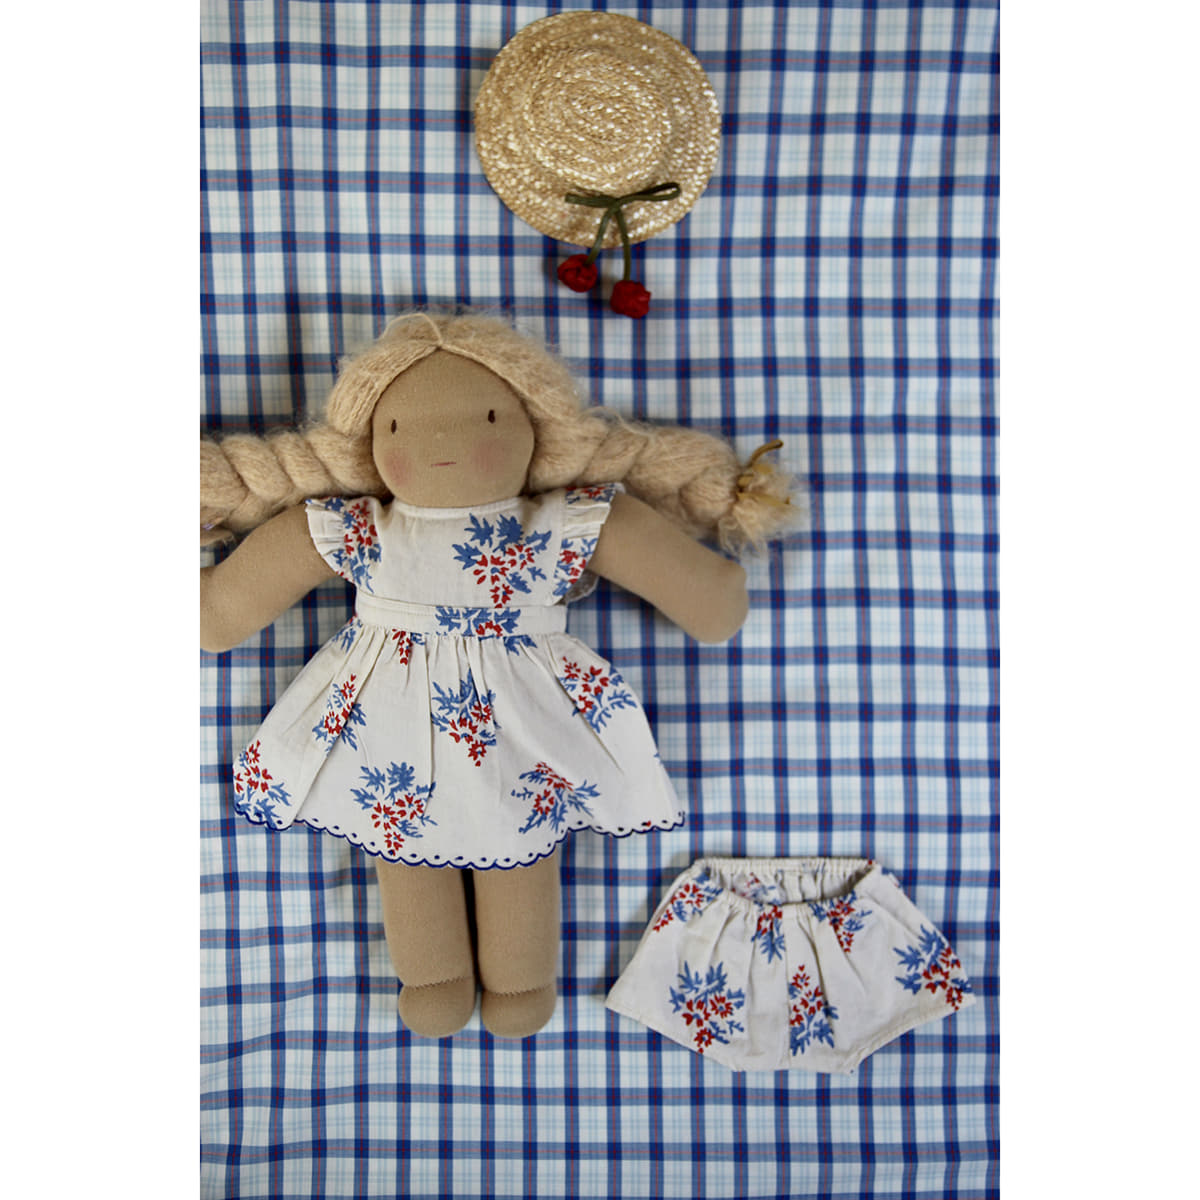 Reina doll dress with festoon embroidery / Panty (Red blue flower print 30`s sheeting)